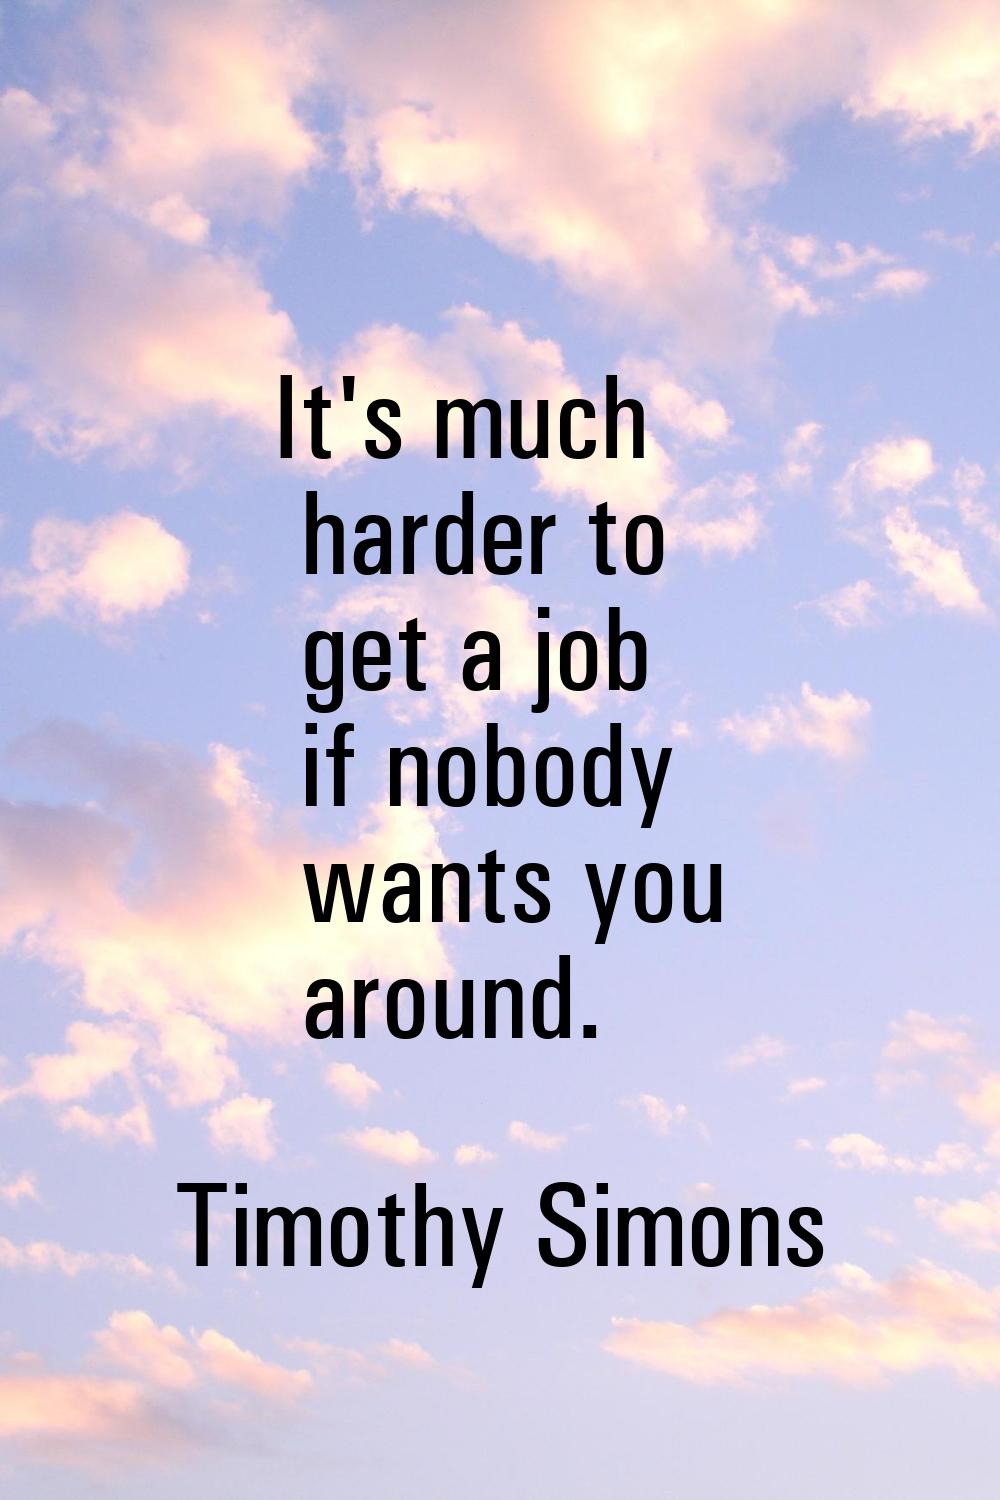 It's much harder to get a job if nobody wants you around.